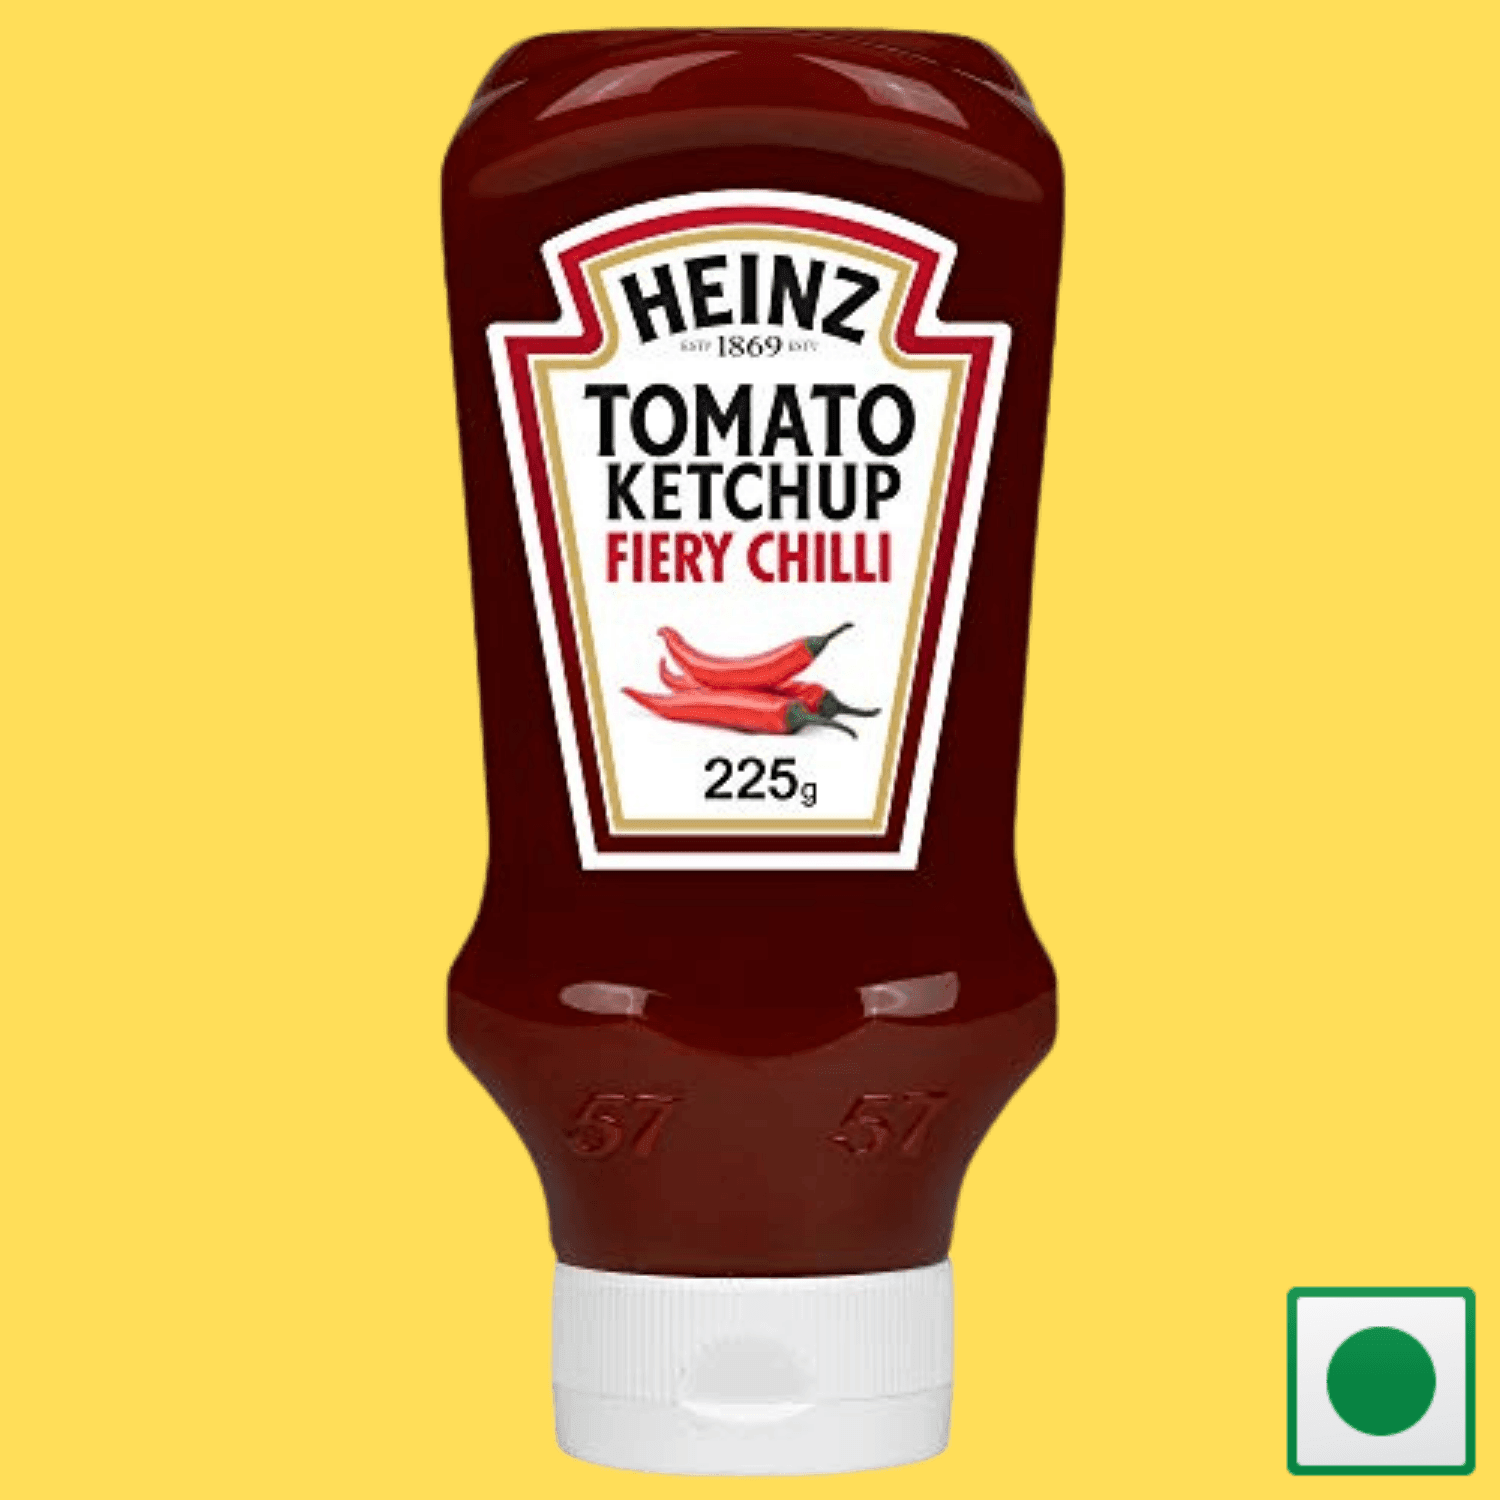 Heinz Tomato Ketchup Fiery Chilli, 255g (Imported) - Super 7 Mart